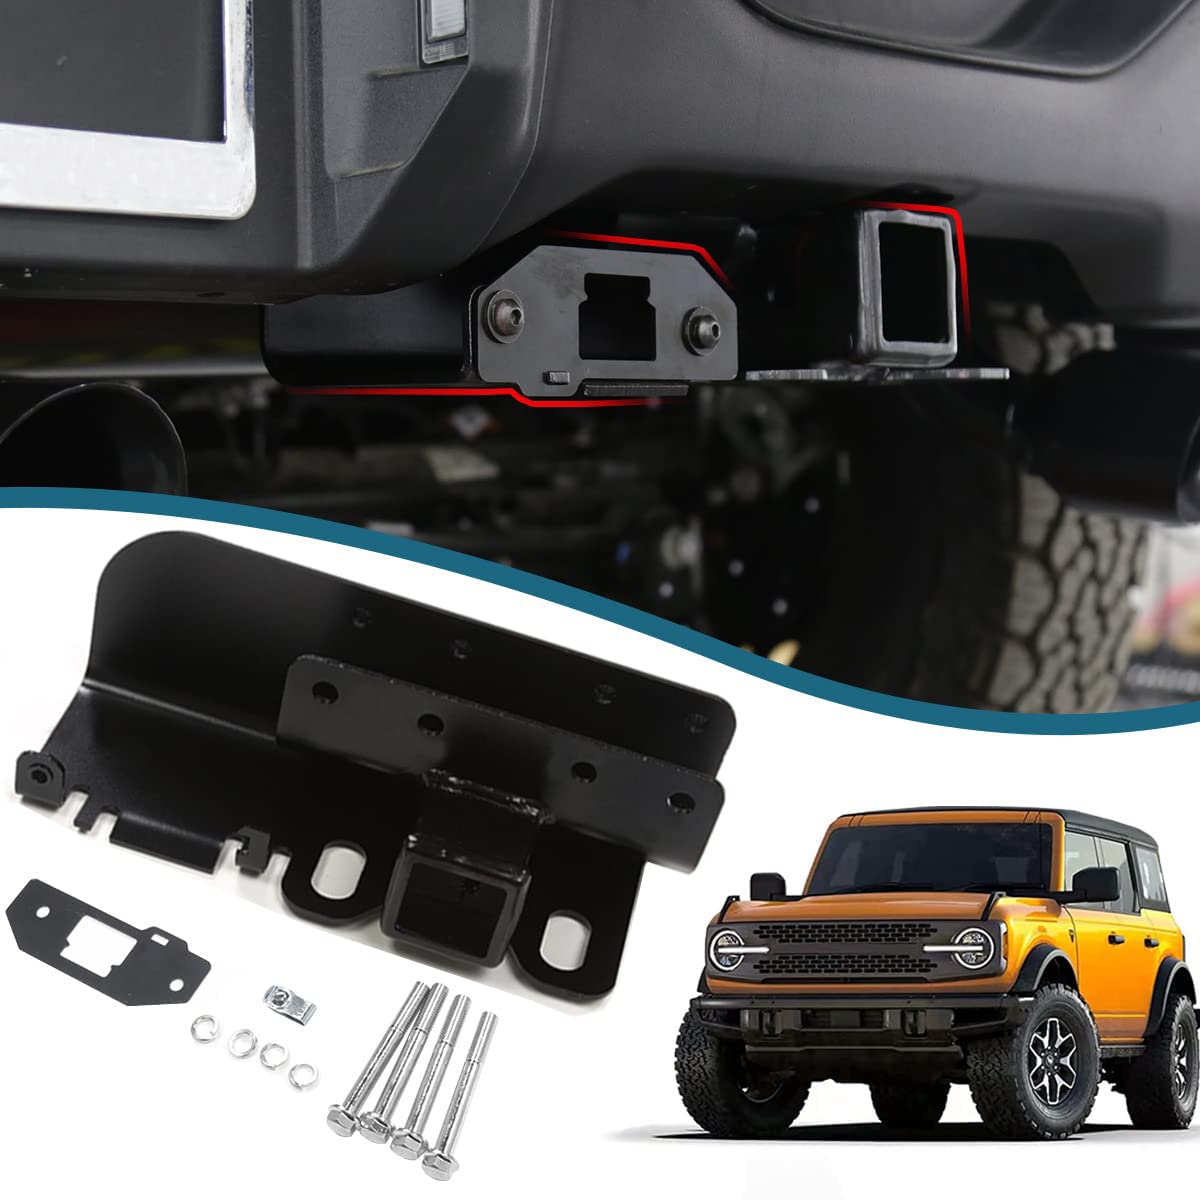 2" Trailer Hitch Receiver Rear Tow Hook Connector Tow Hook Kit for 2021+ Ford Bronco 2/4 Door